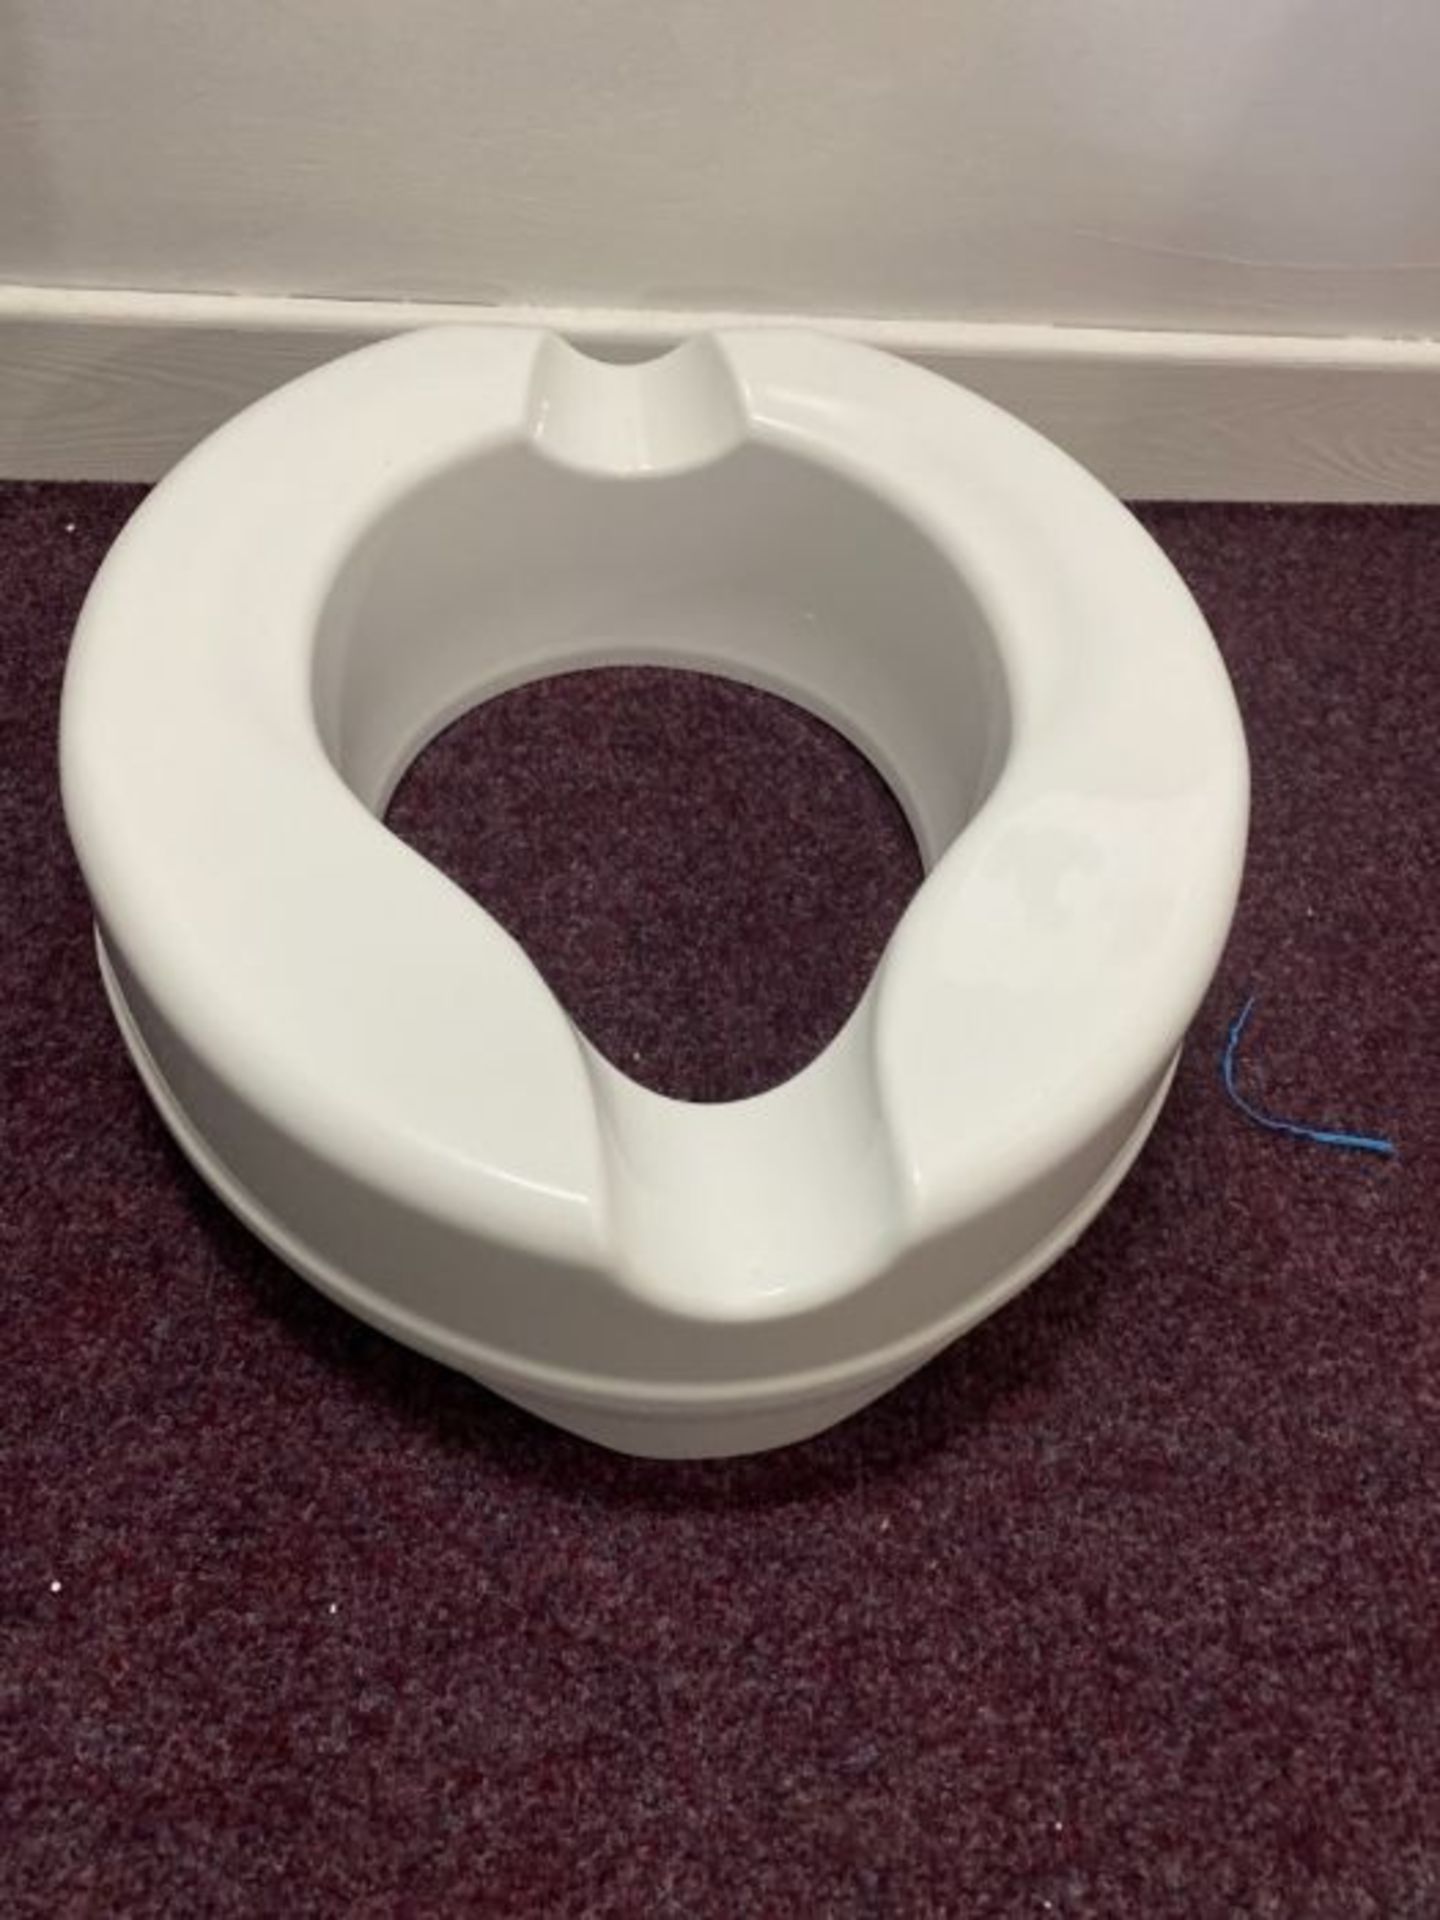 Aidapt 4 inch Senator Raised Toilet Seat (Eligible for VAT relief in the UK) - Image 2 of 2